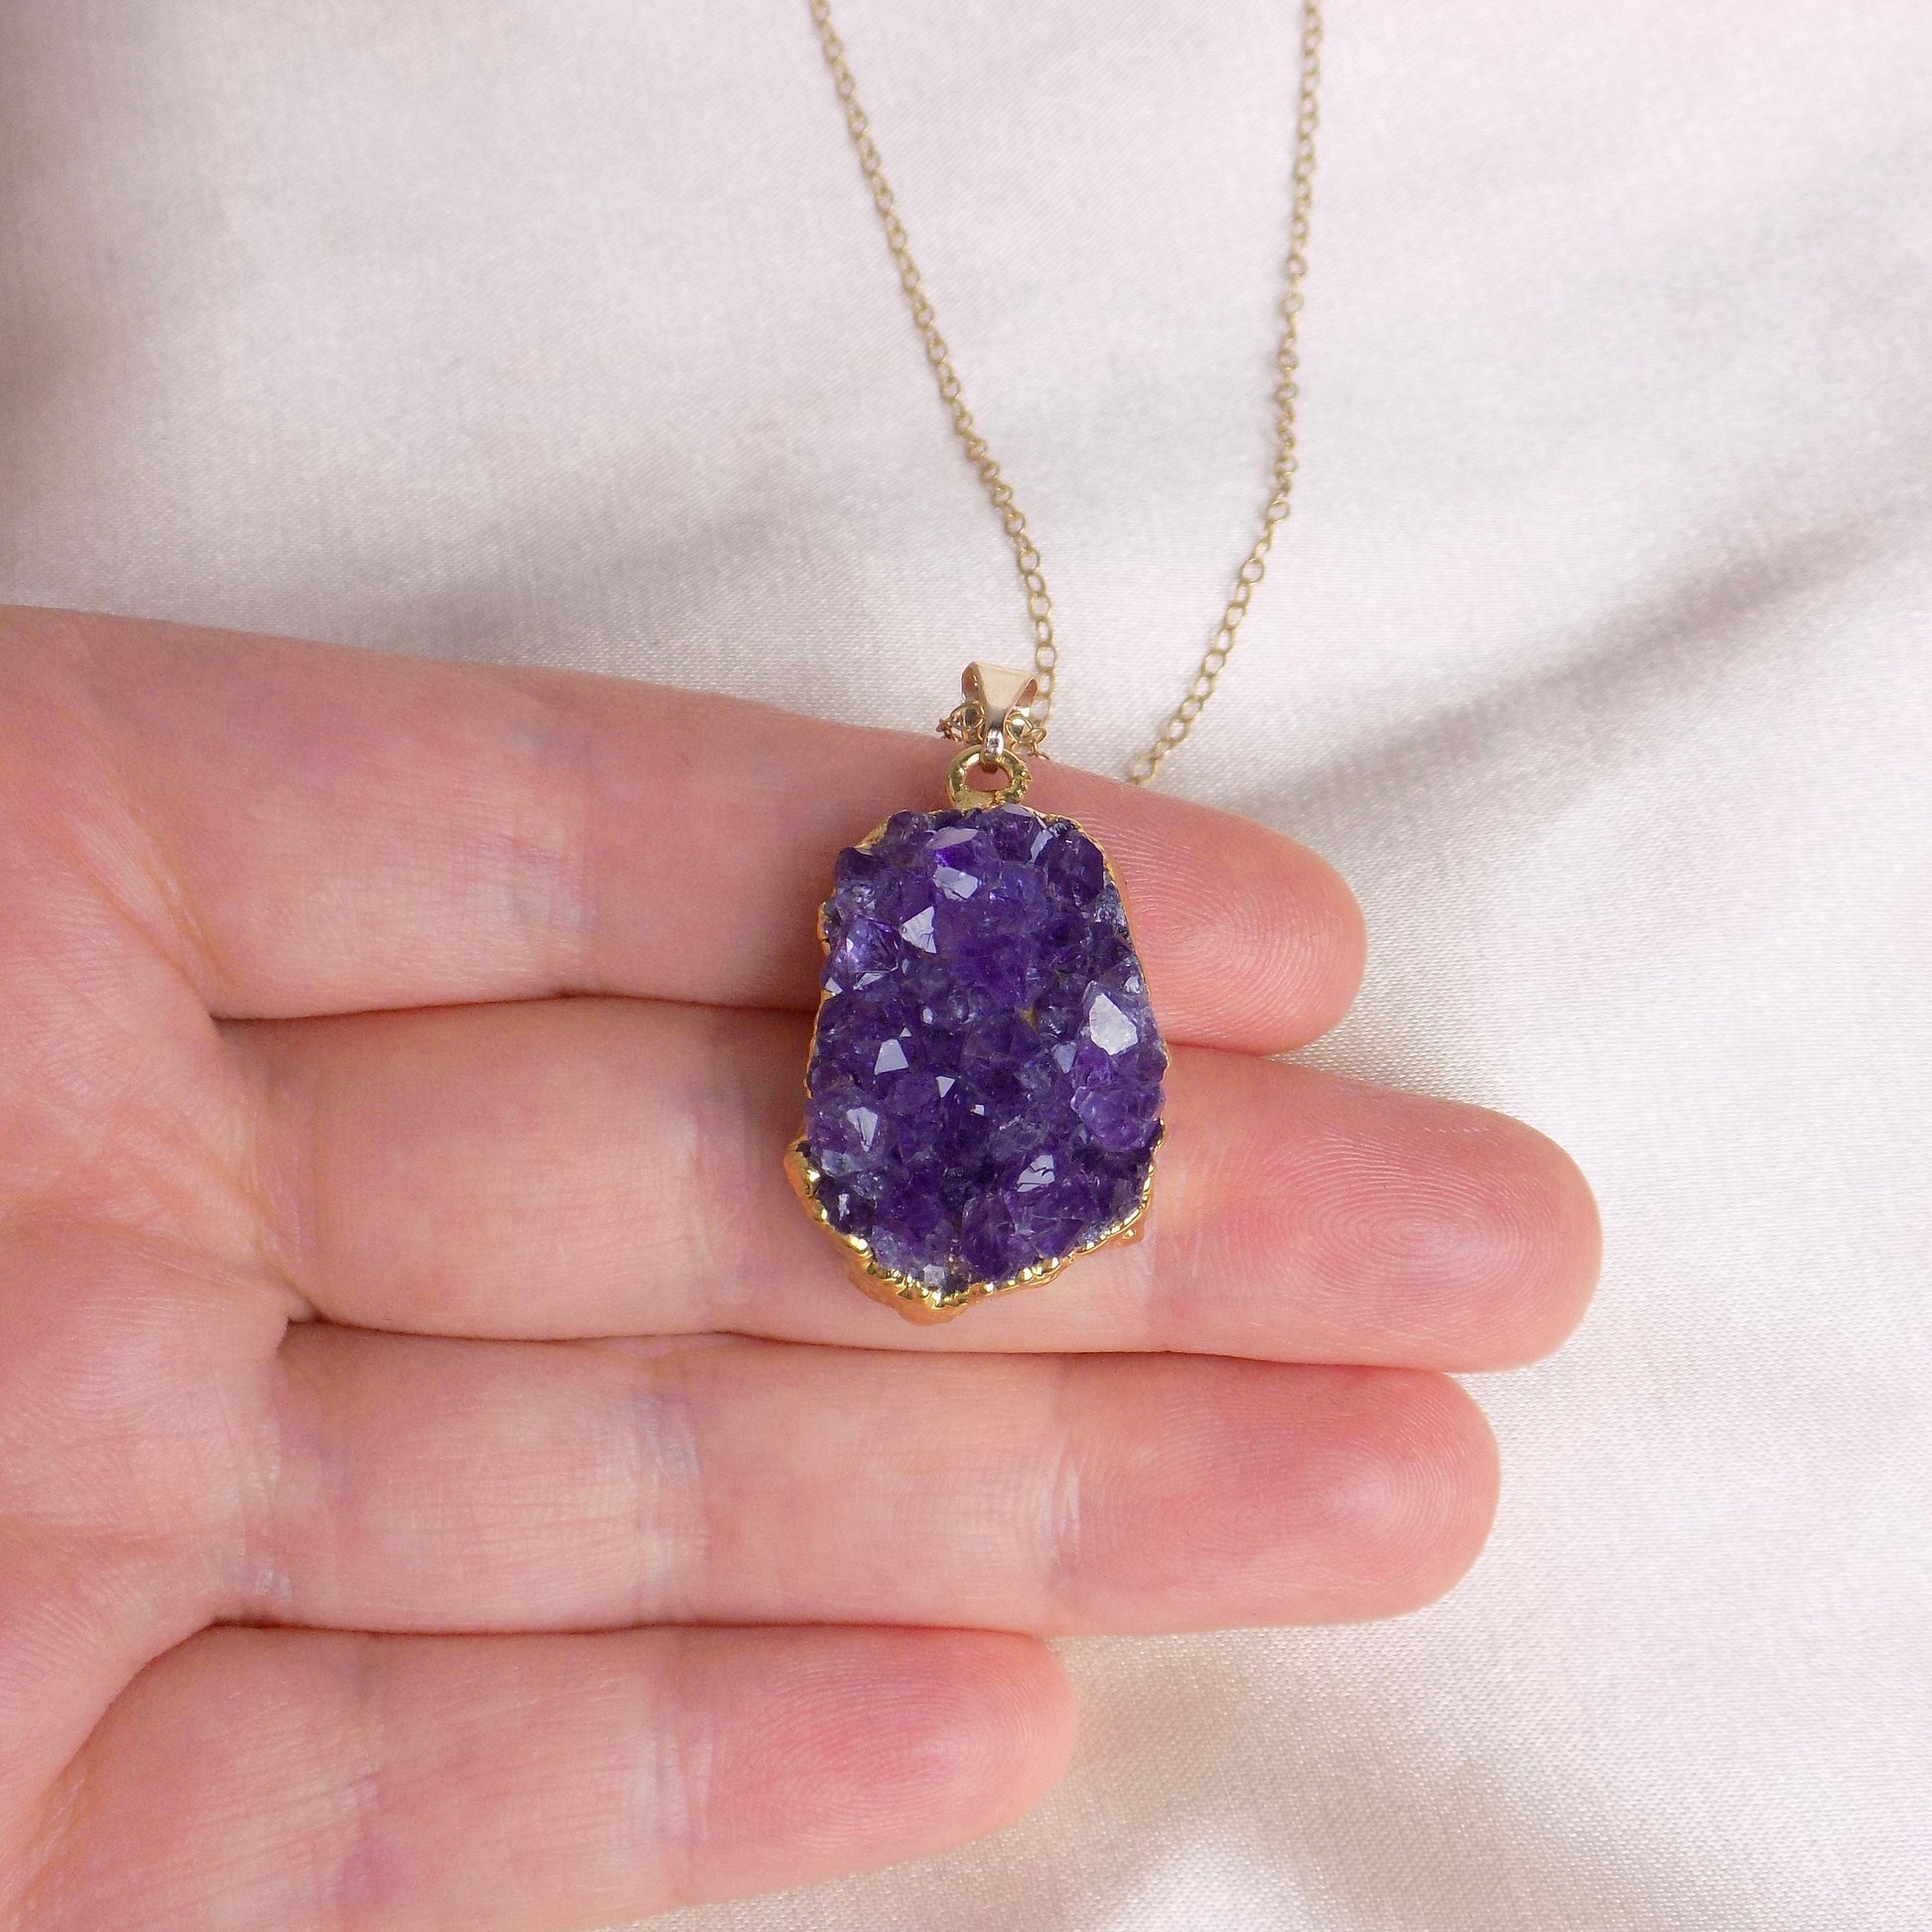 Gift For Mom, Lavender Amethyst Necklace, Raw Druzy Pendant Necklace Gold, Healing Crystal Necklaces For Women, Gifts For Grandma, G14-774